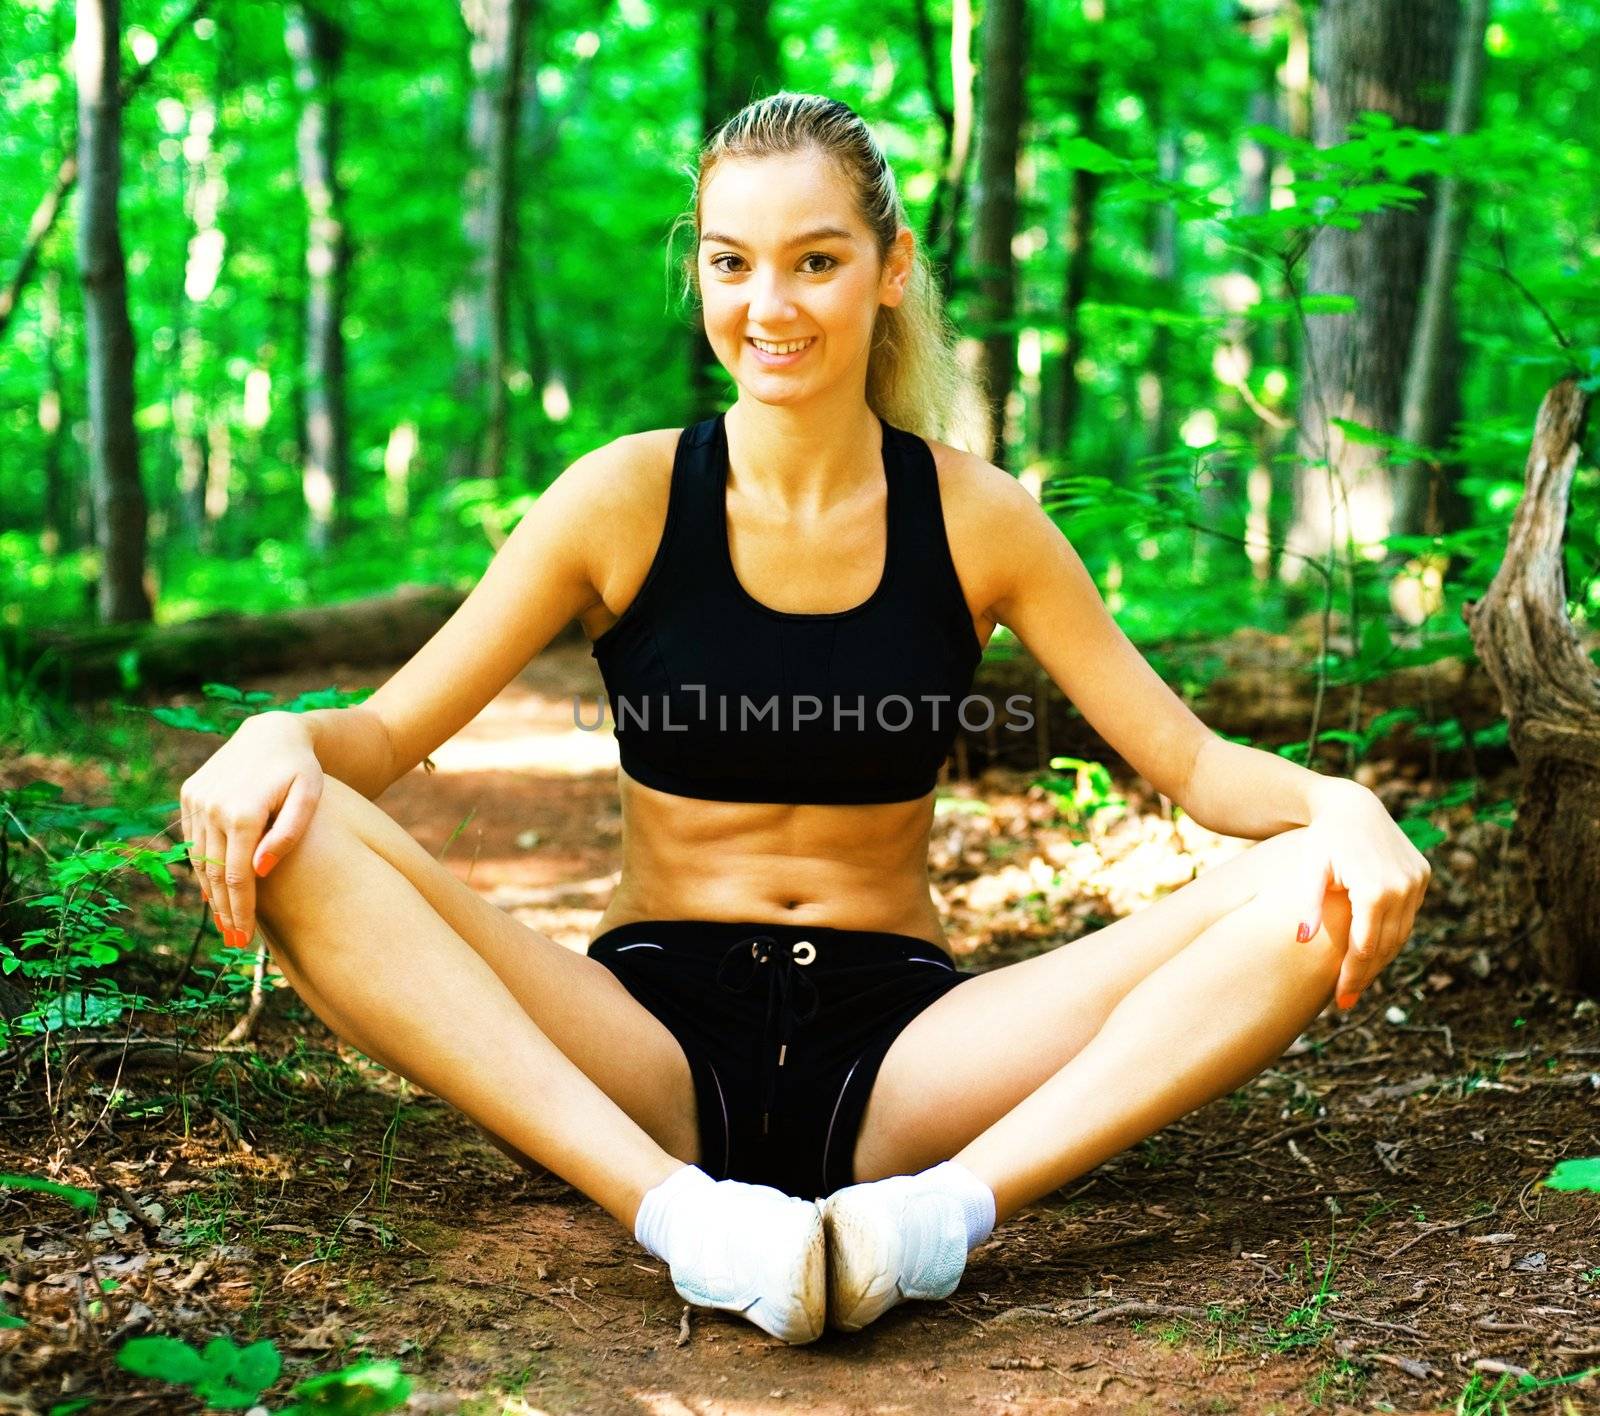 Blonde haired woman exercising, from a complete series of photos.